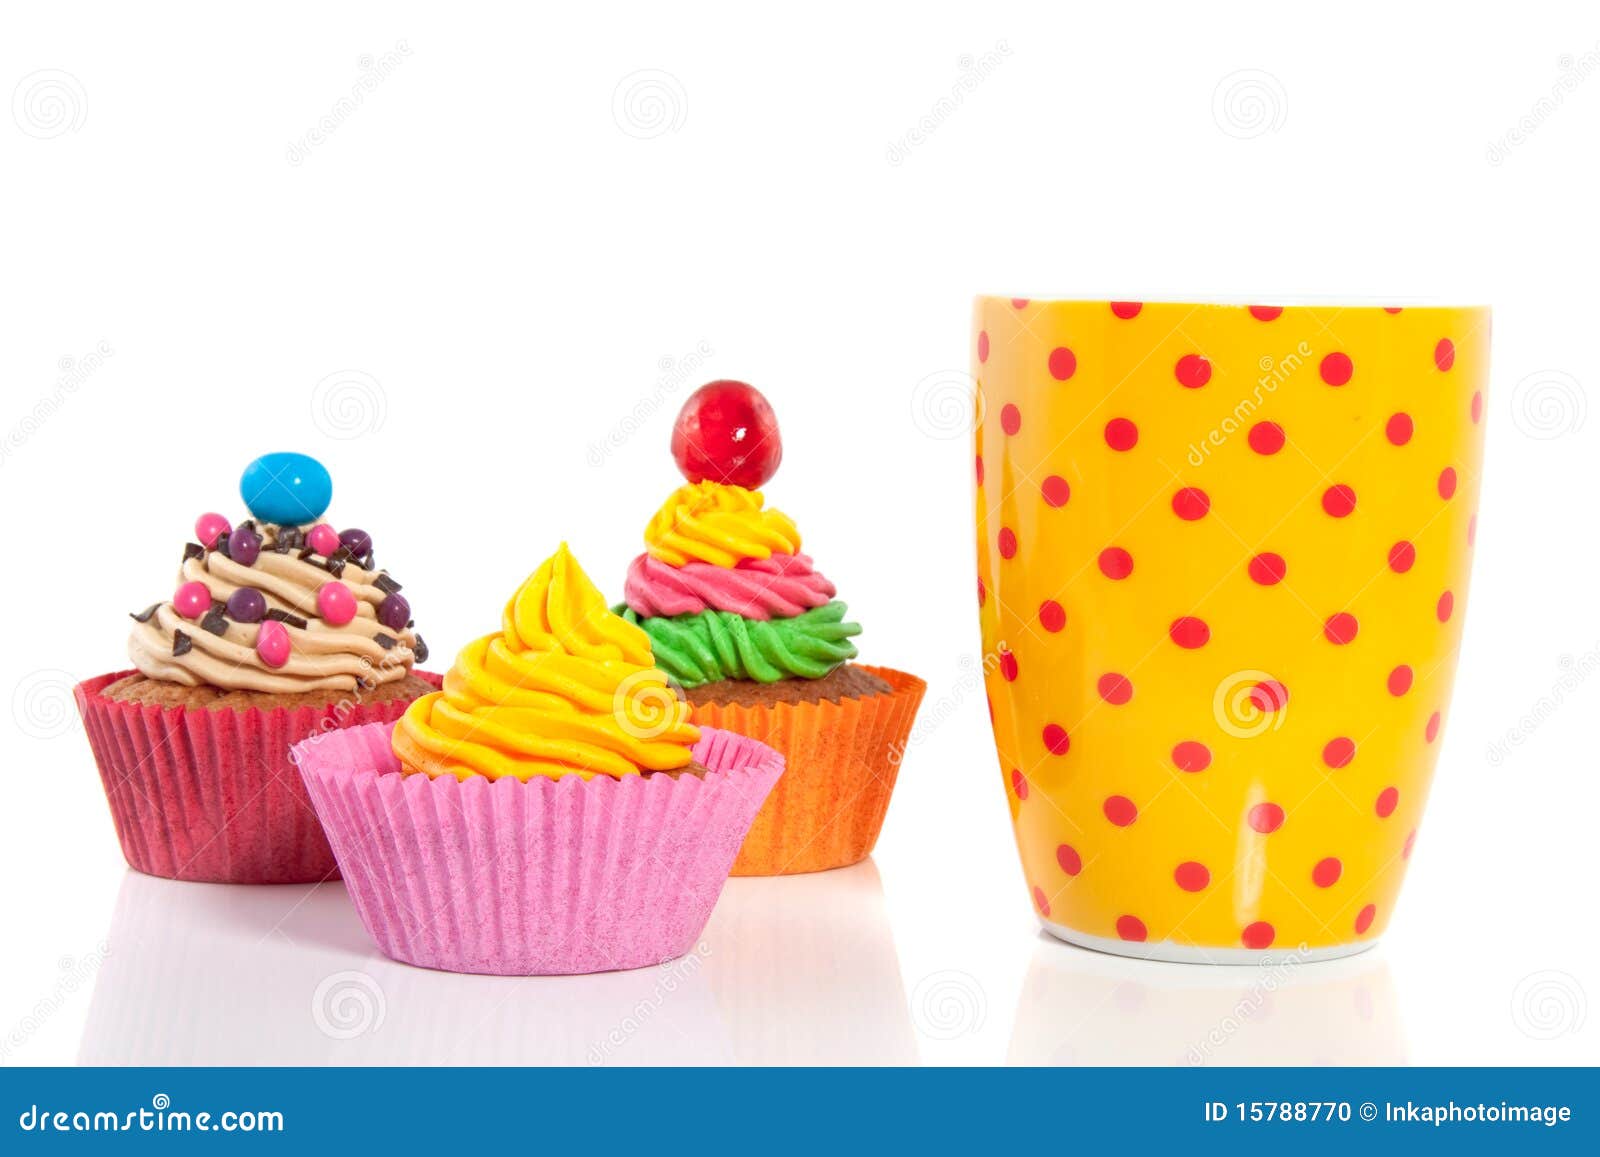 Cheerful cupcakes. Three colorful creamed cupcakes with a cherry and chocolate on top with a dotted tea cup isolated over white